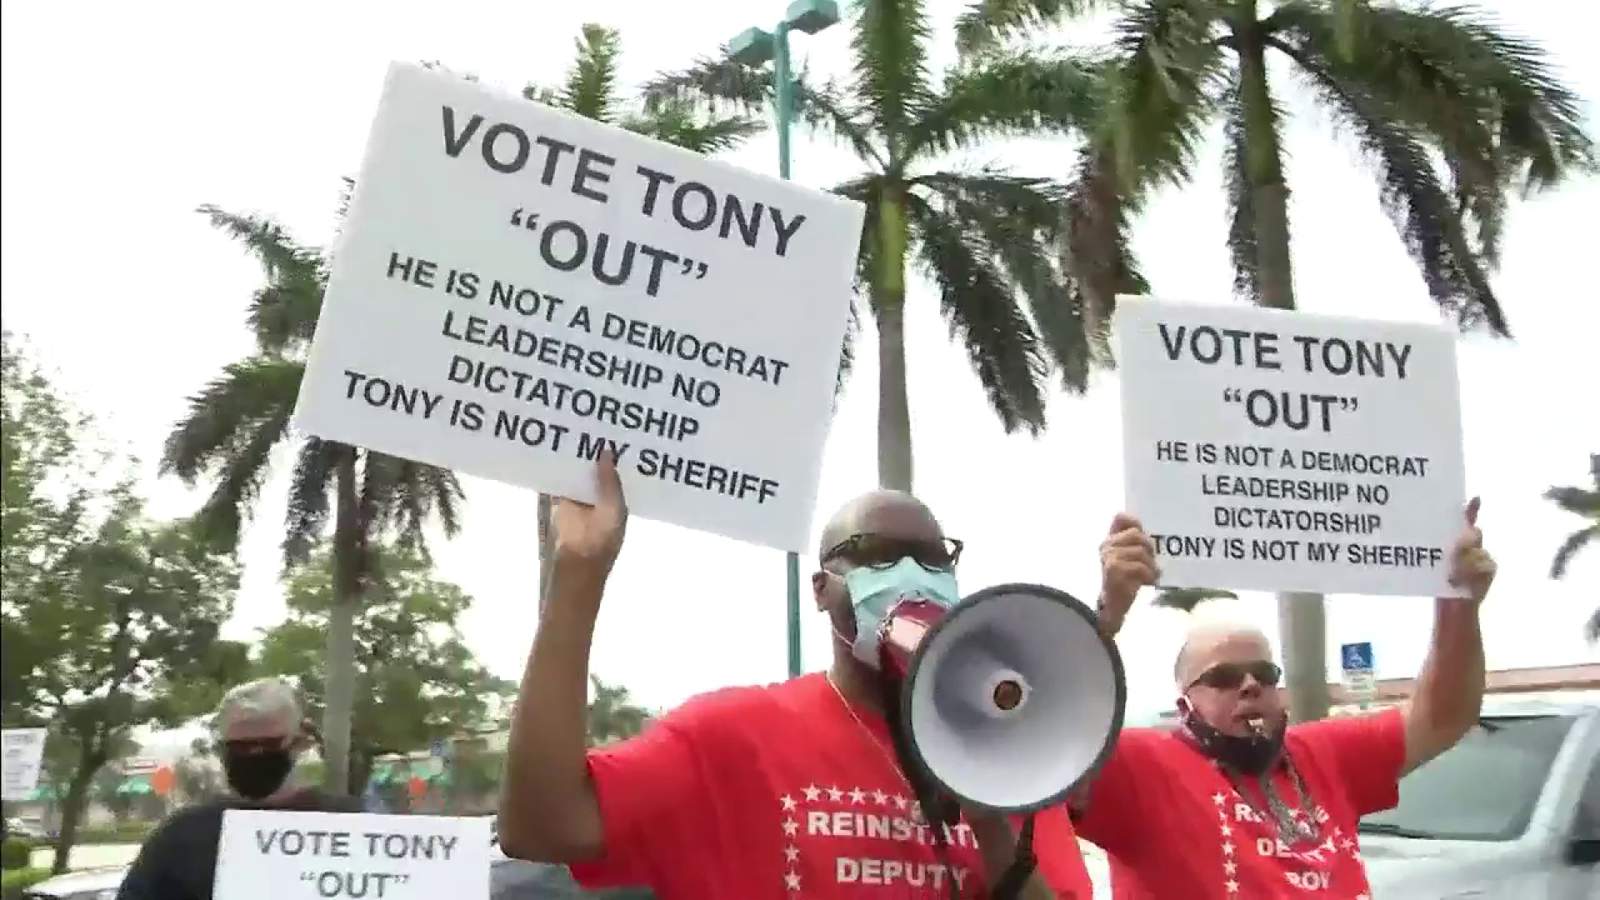 DeSantis will let voters decide on Sheriff Tony after Broward deputies union asks for his removal